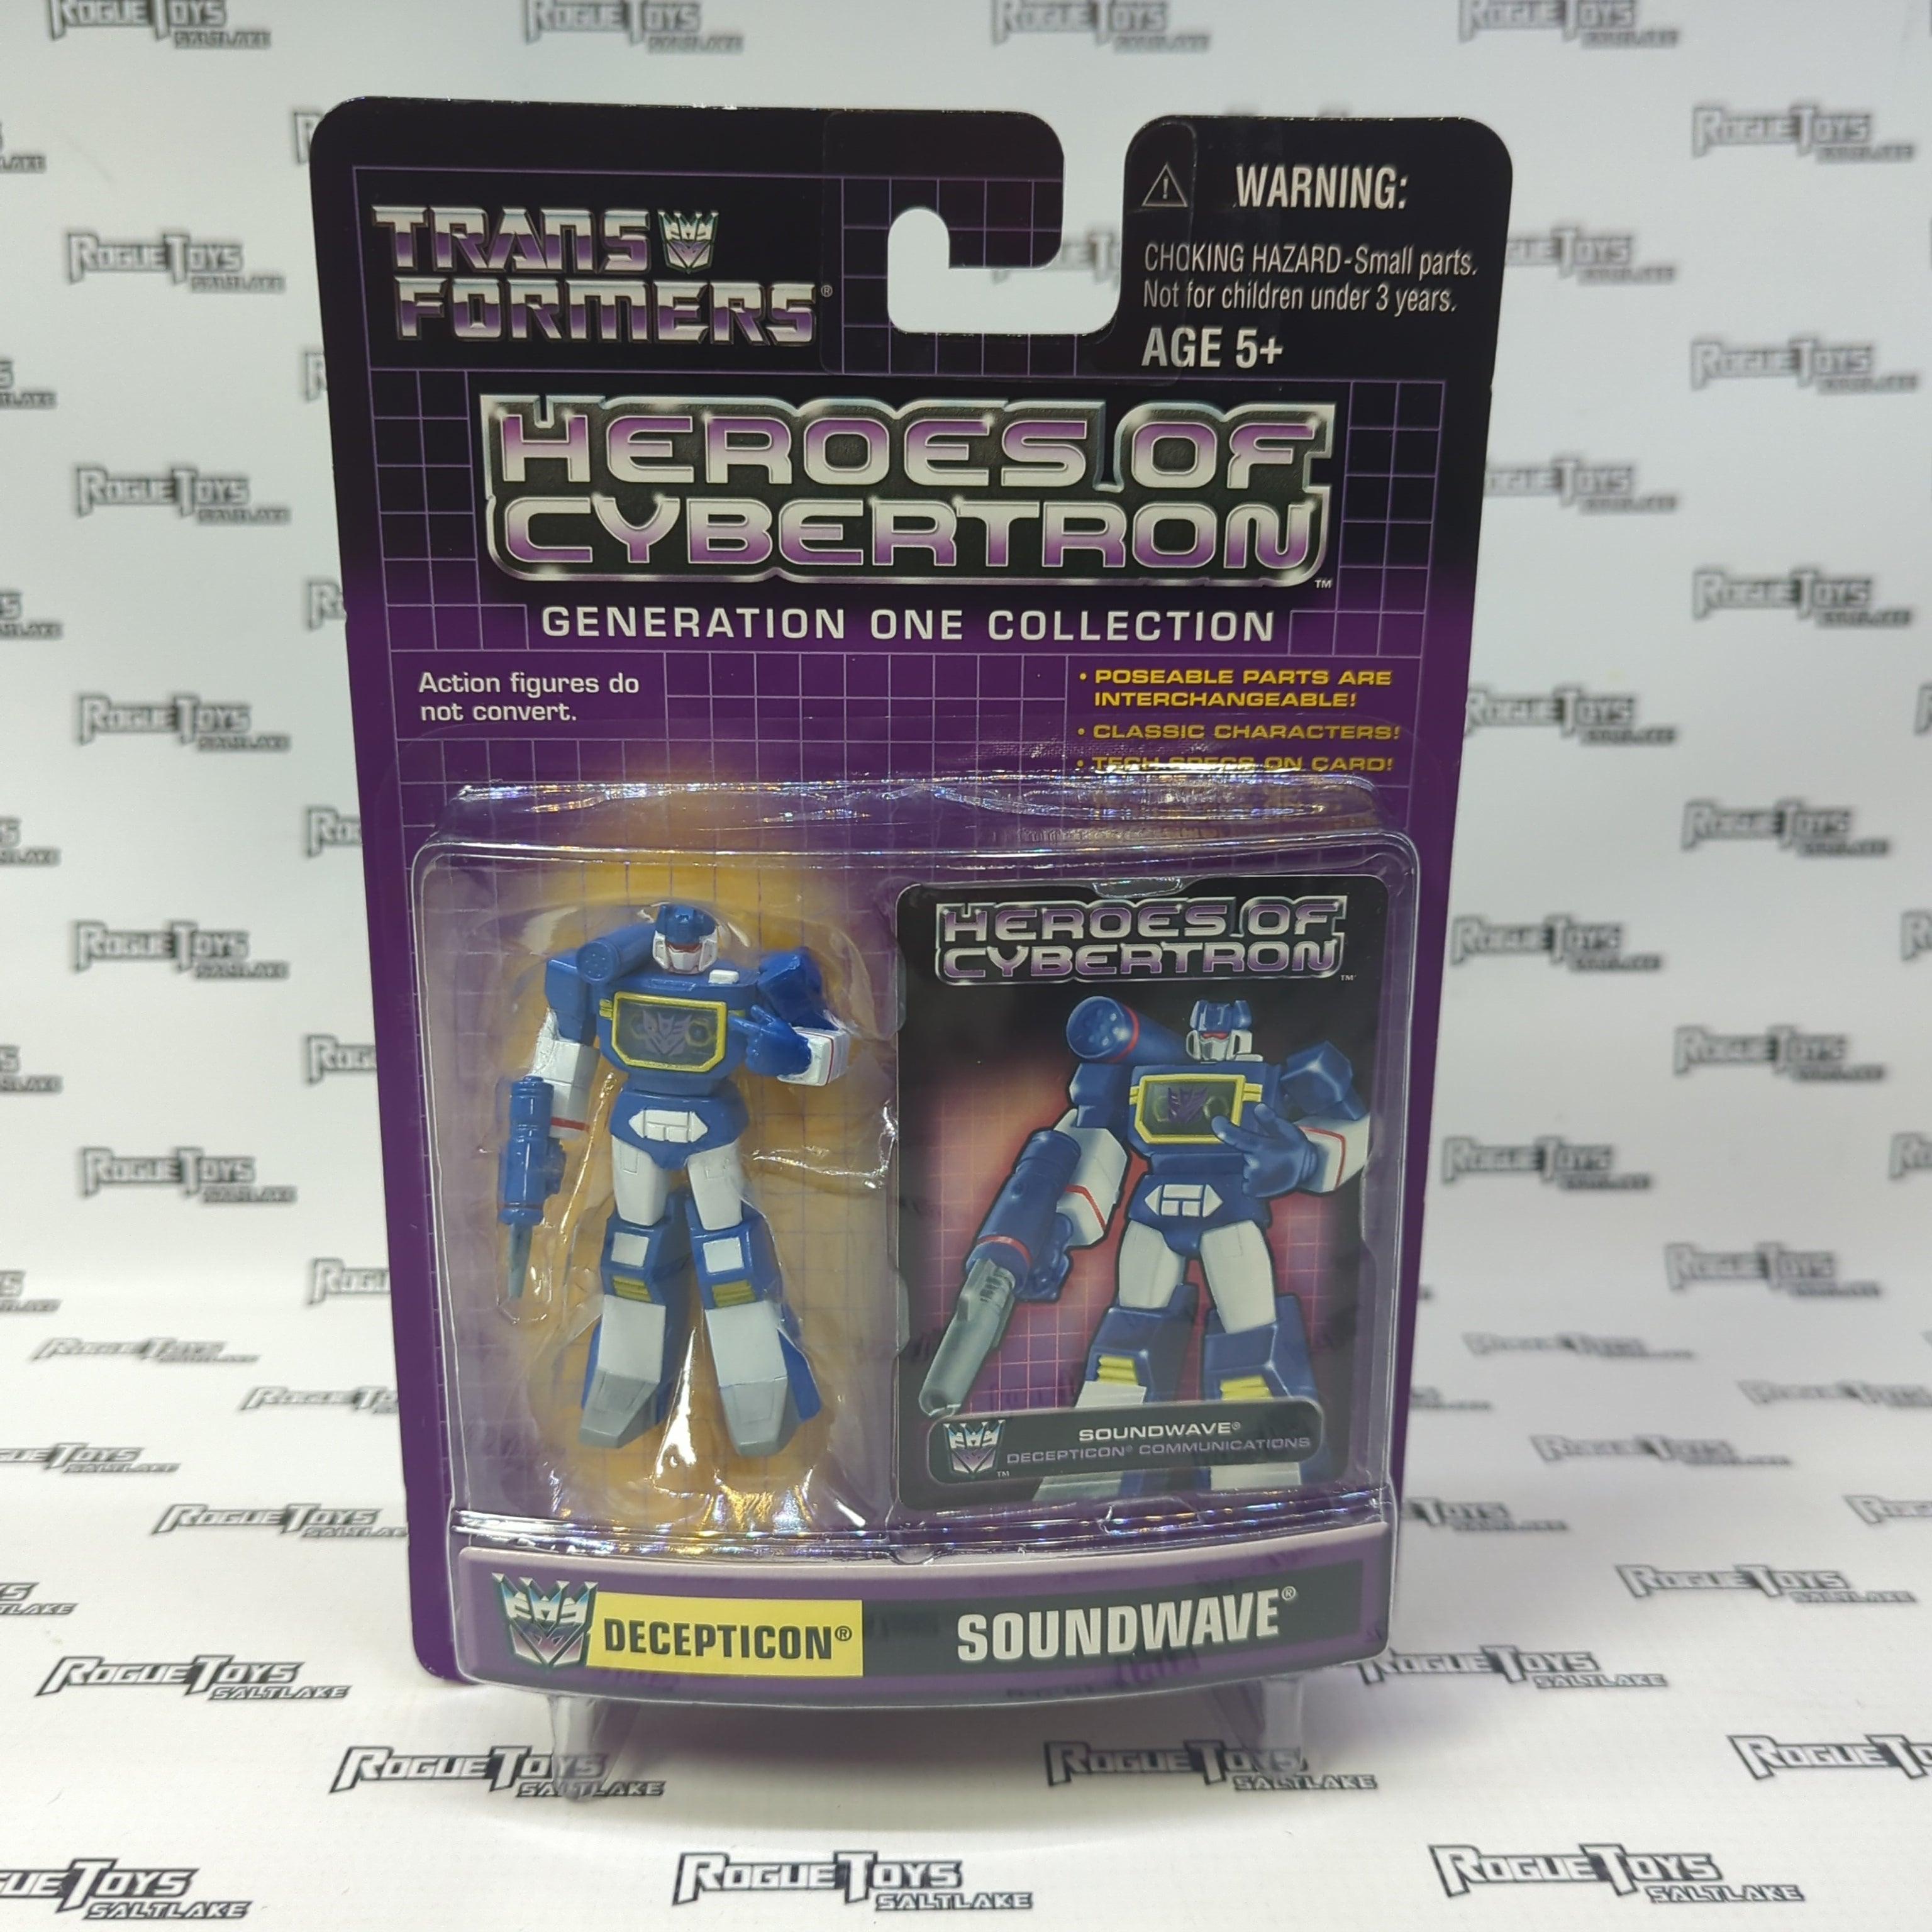 Hasbro Transformers Heroes of Cybertron Generation One Collection Decepticon Soundwave